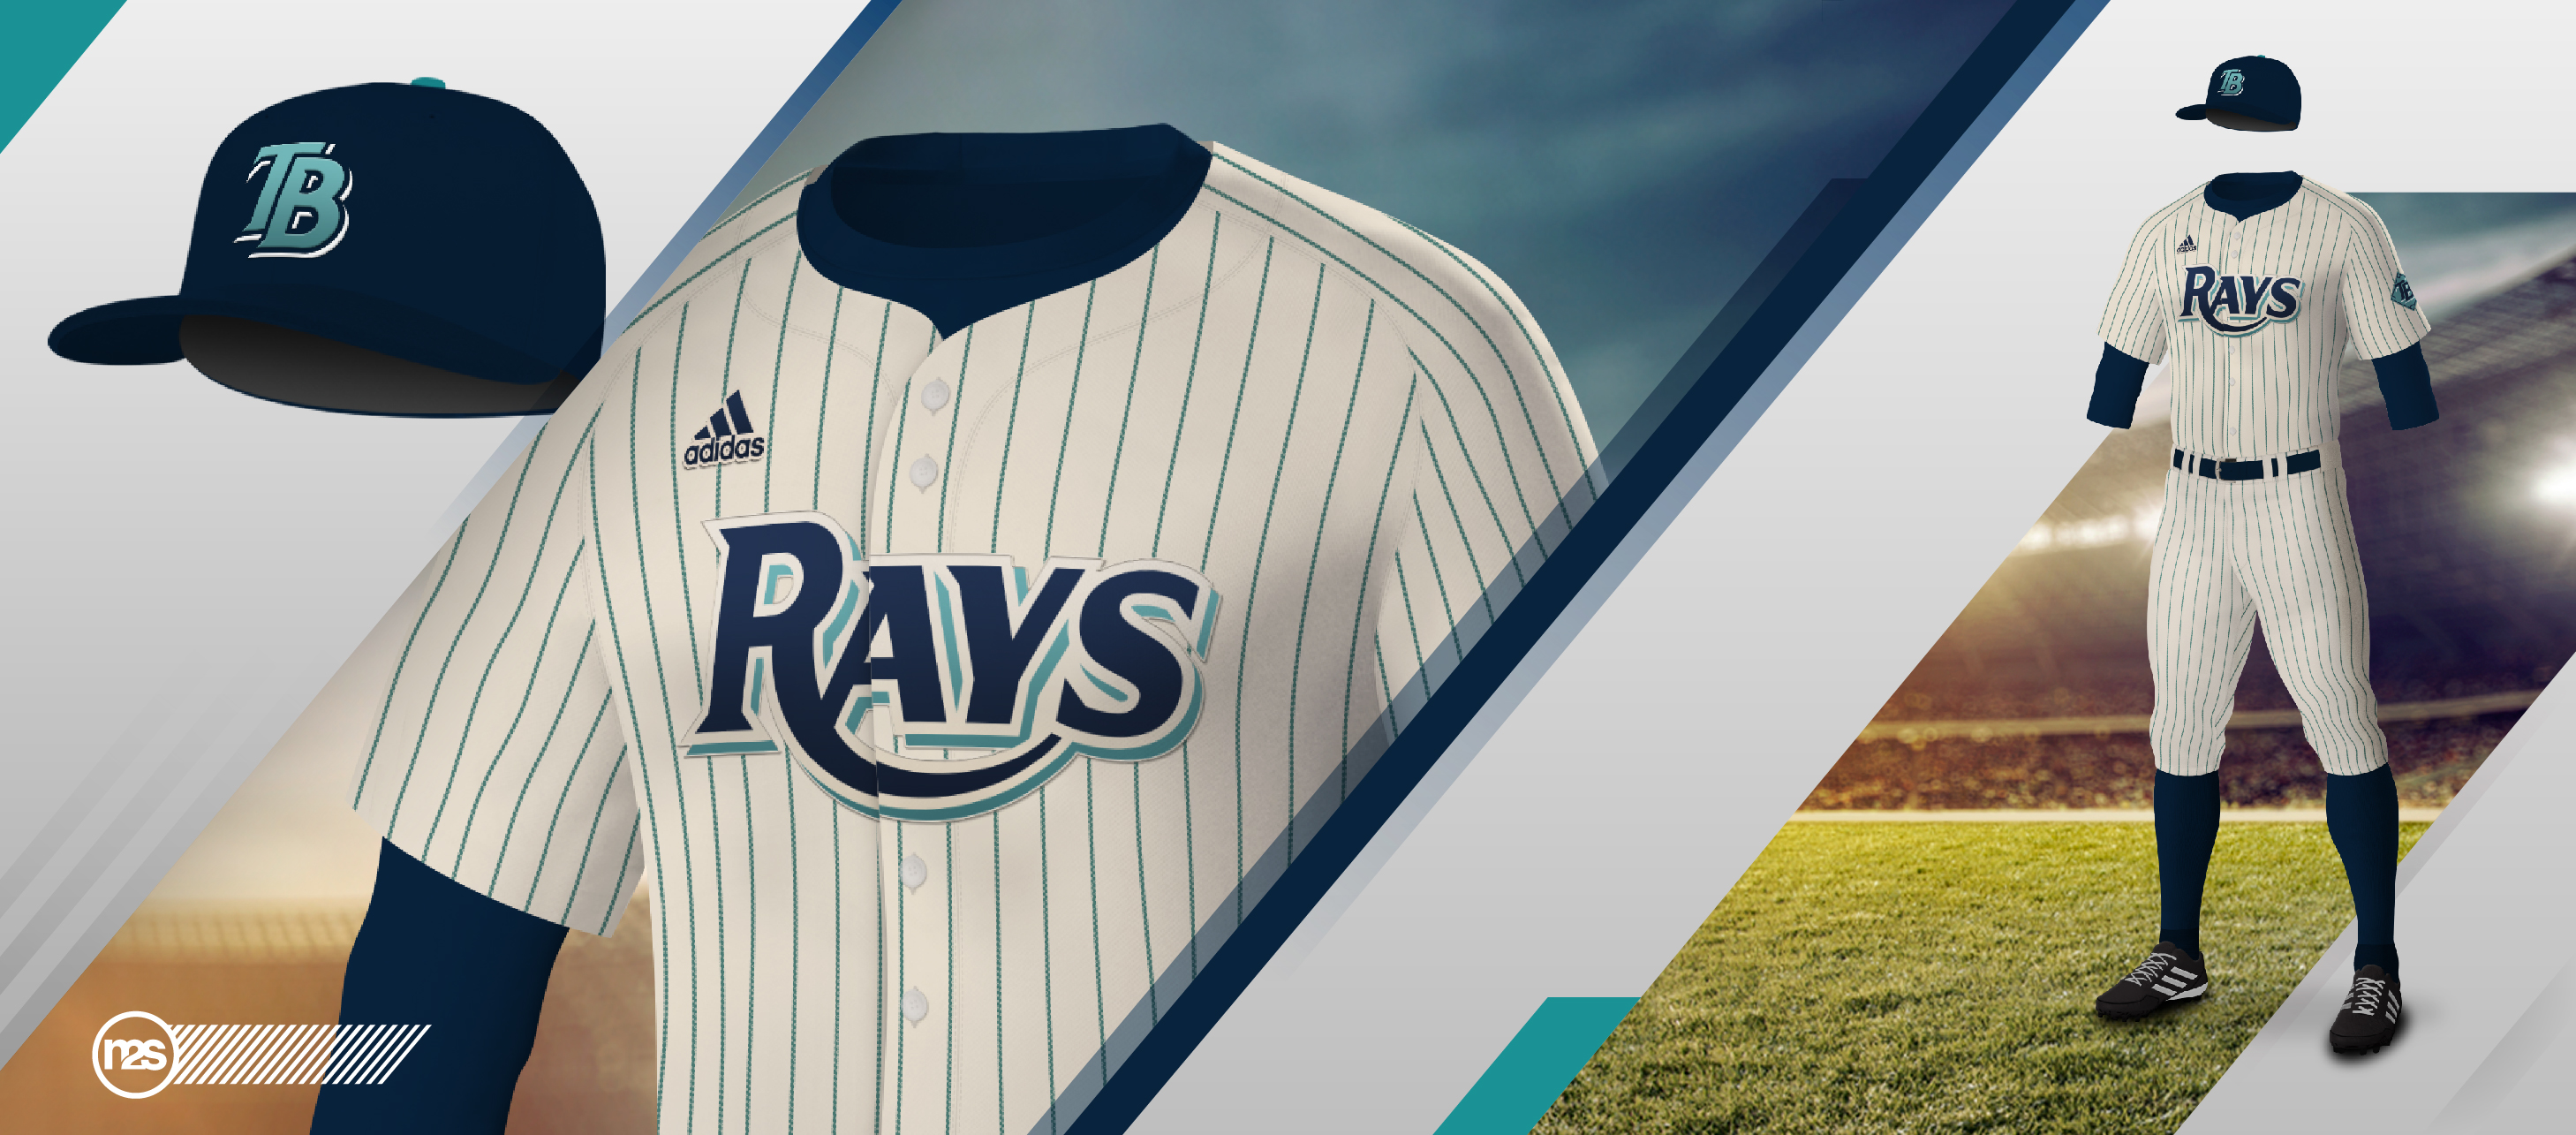 concept tampa bay rays uniforms